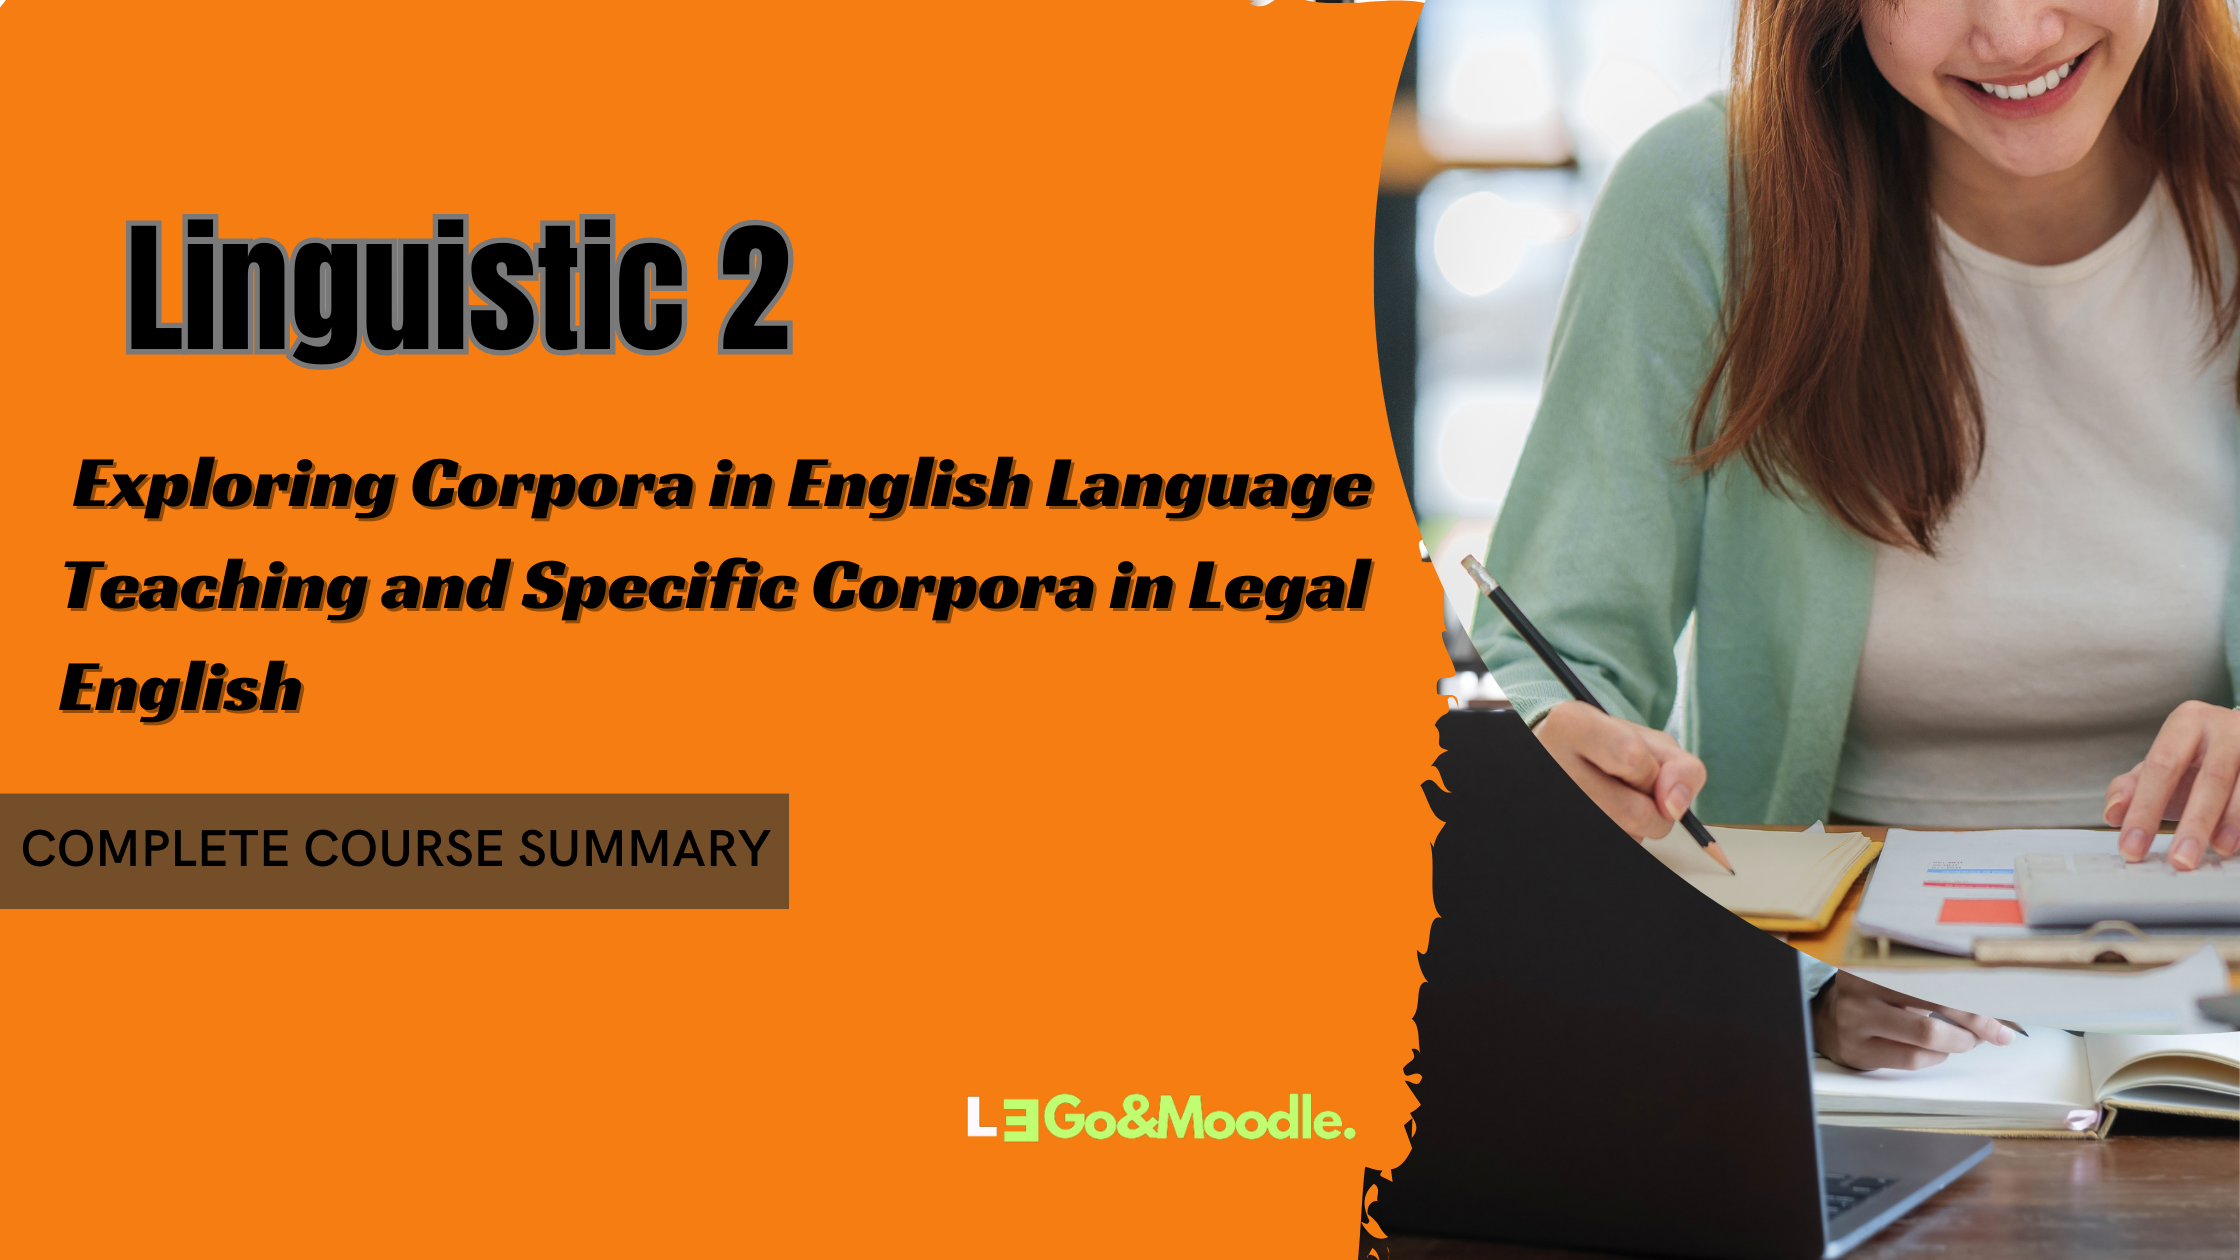 Exploring Corpora in English Language Teaching and Specific Corpora in Legal English